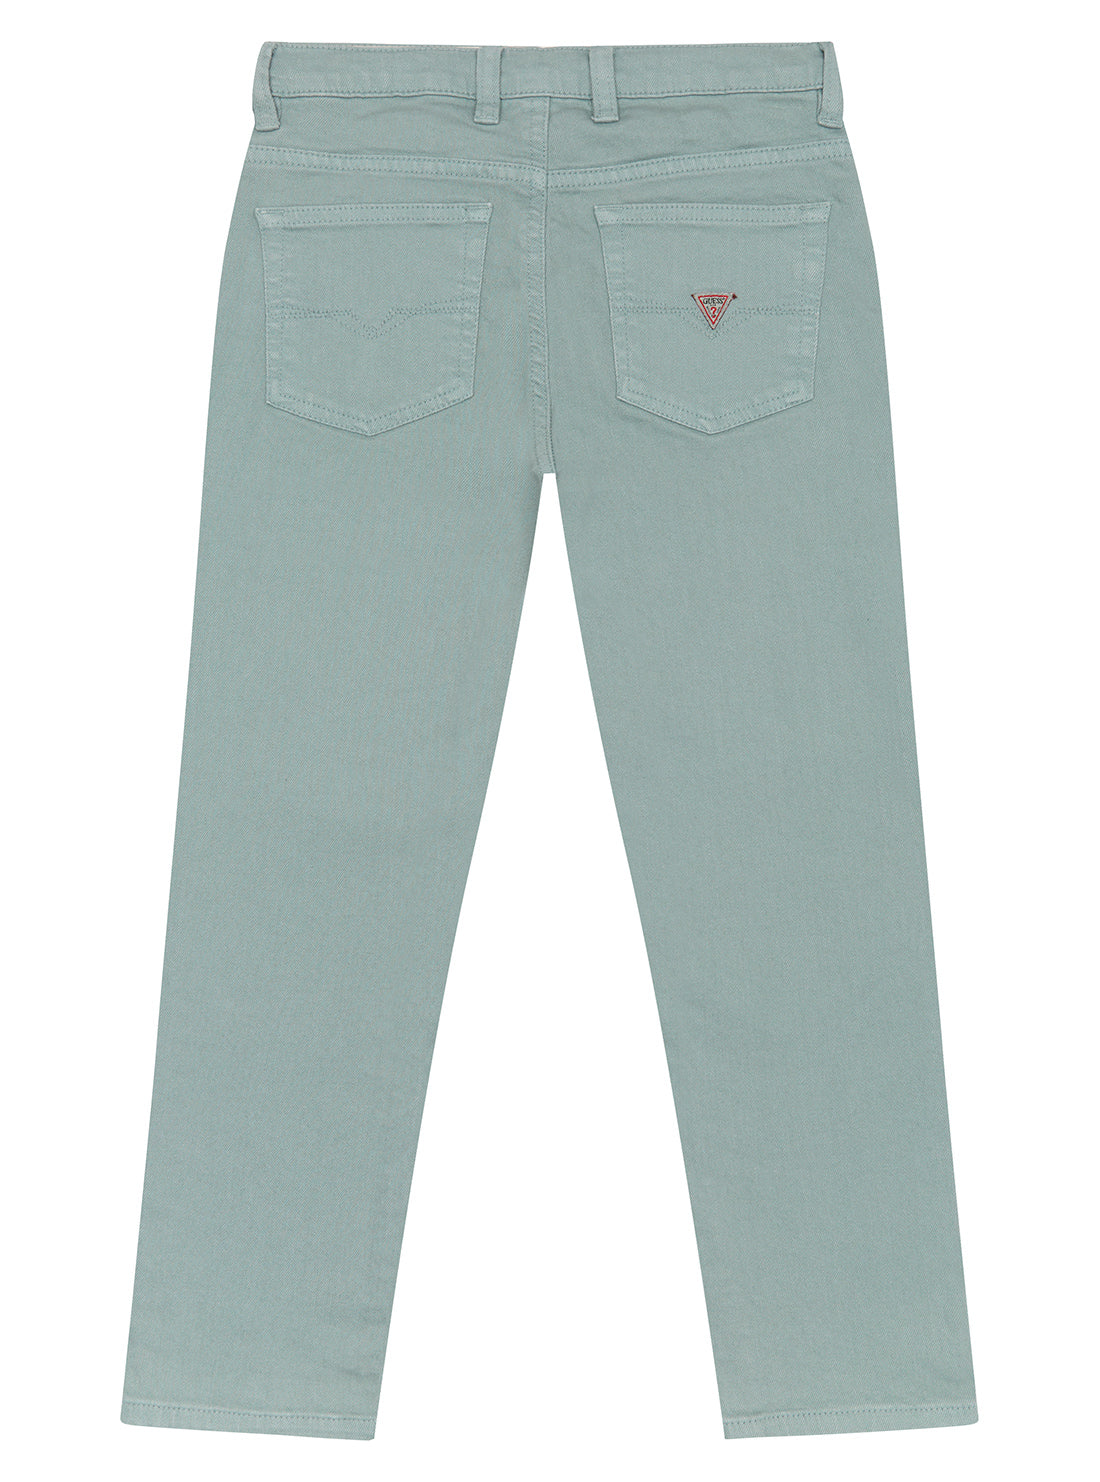 GUESS Green Bull Denim Straight Fit Pants (2-7) back view